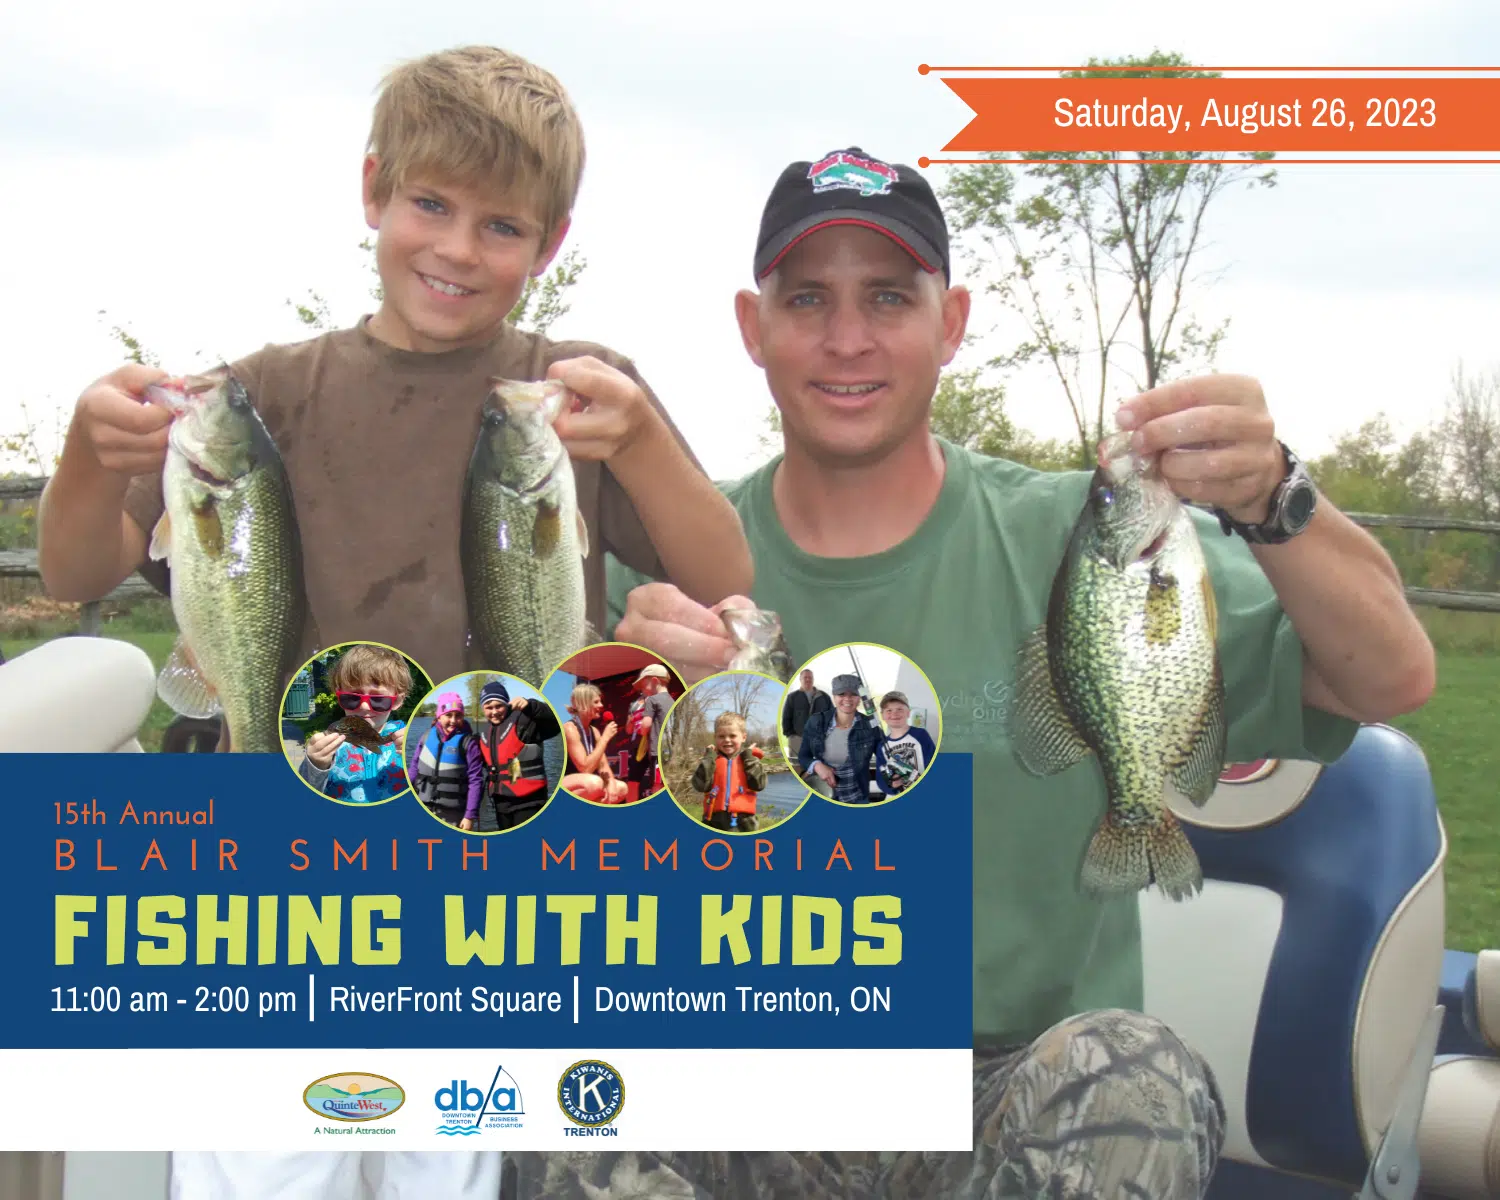 Annual Blair Smith Memorial fishing event returns August 26